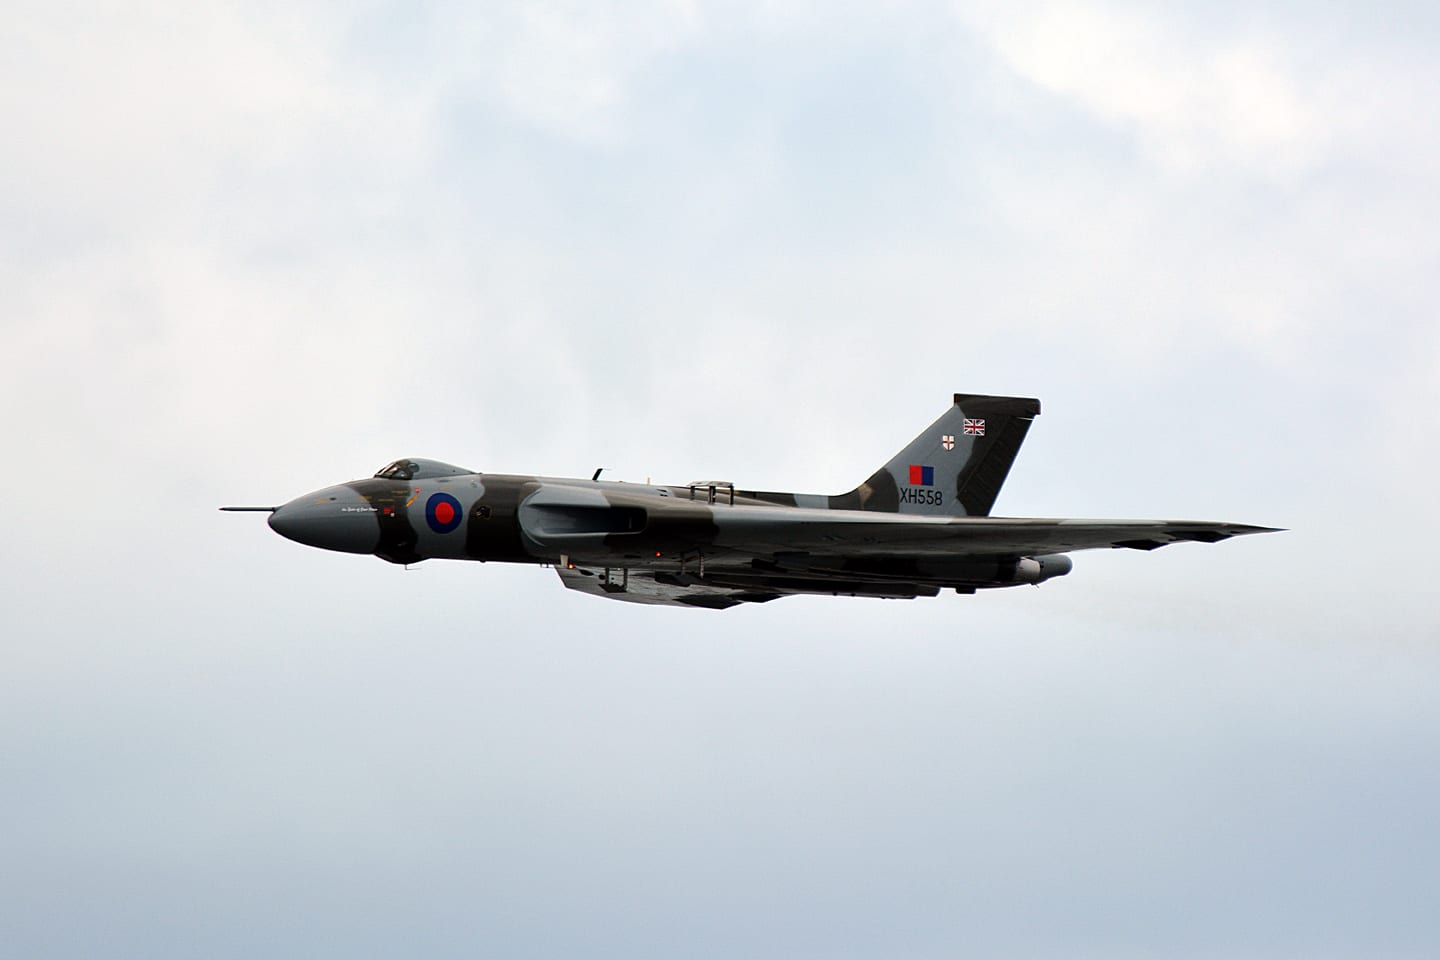 Vulcan at Blackpool Airshow on Sunday 9 August 2015